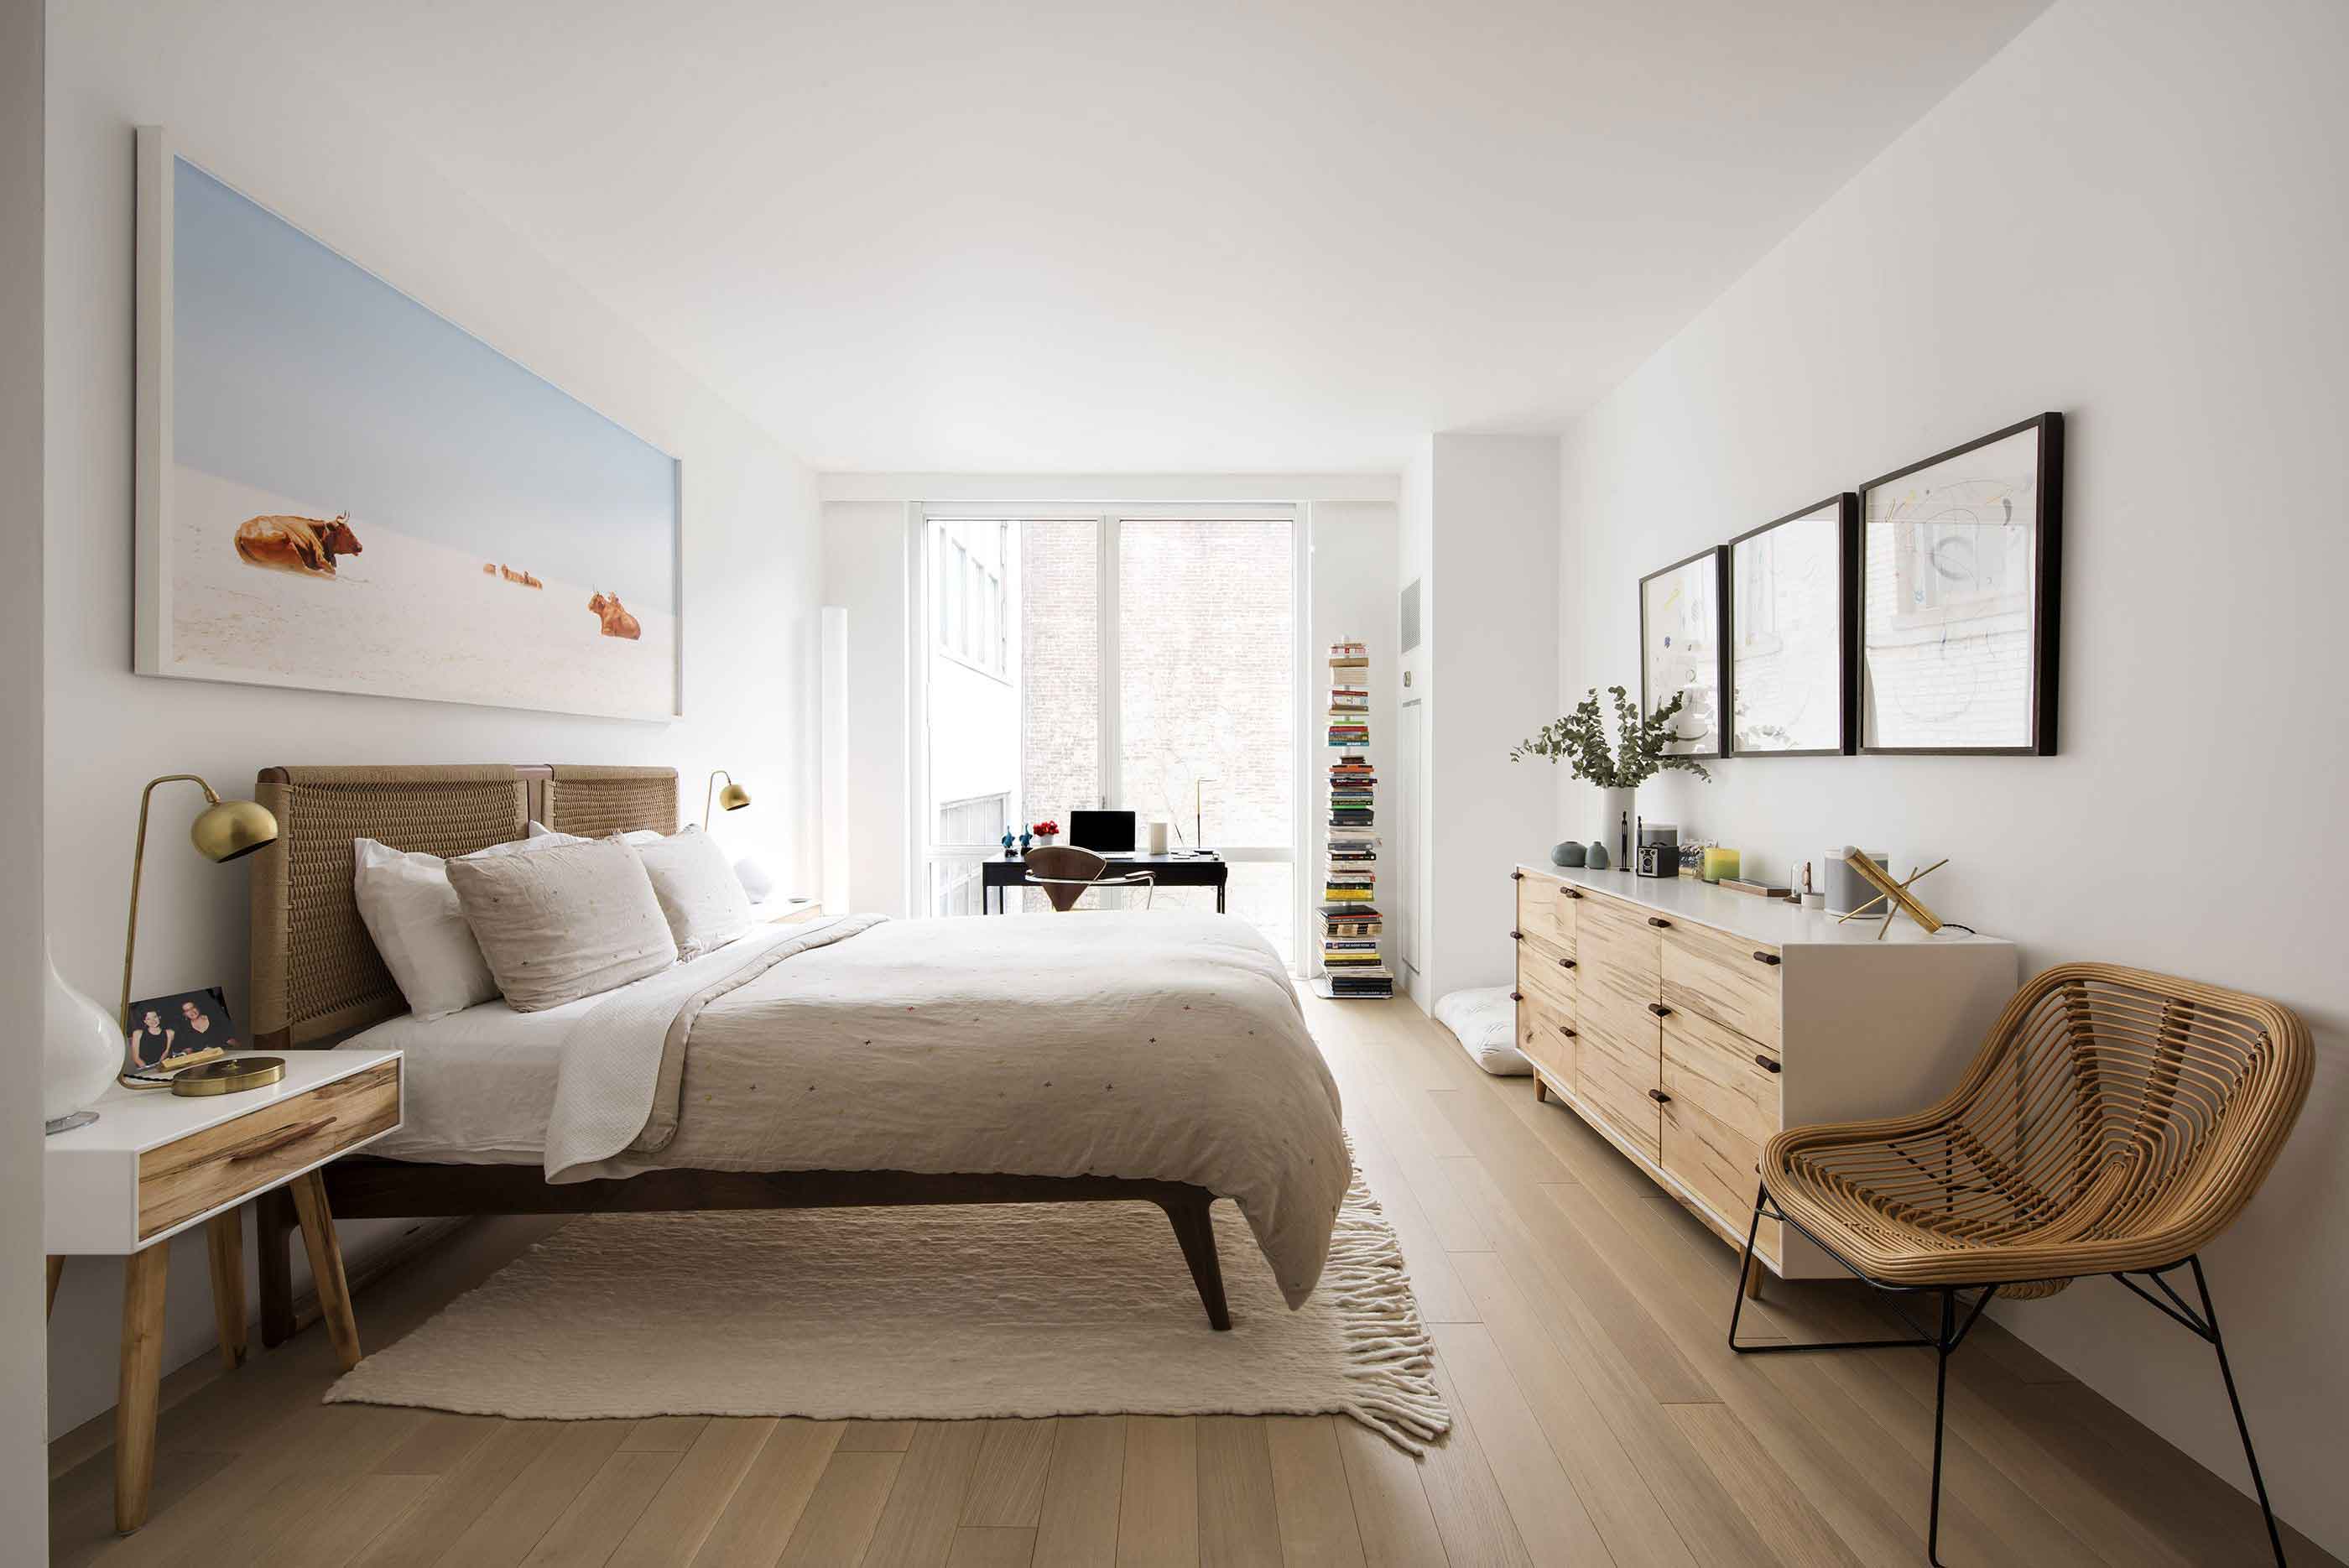 Urban Modern Bedroom Ideas for Your Home